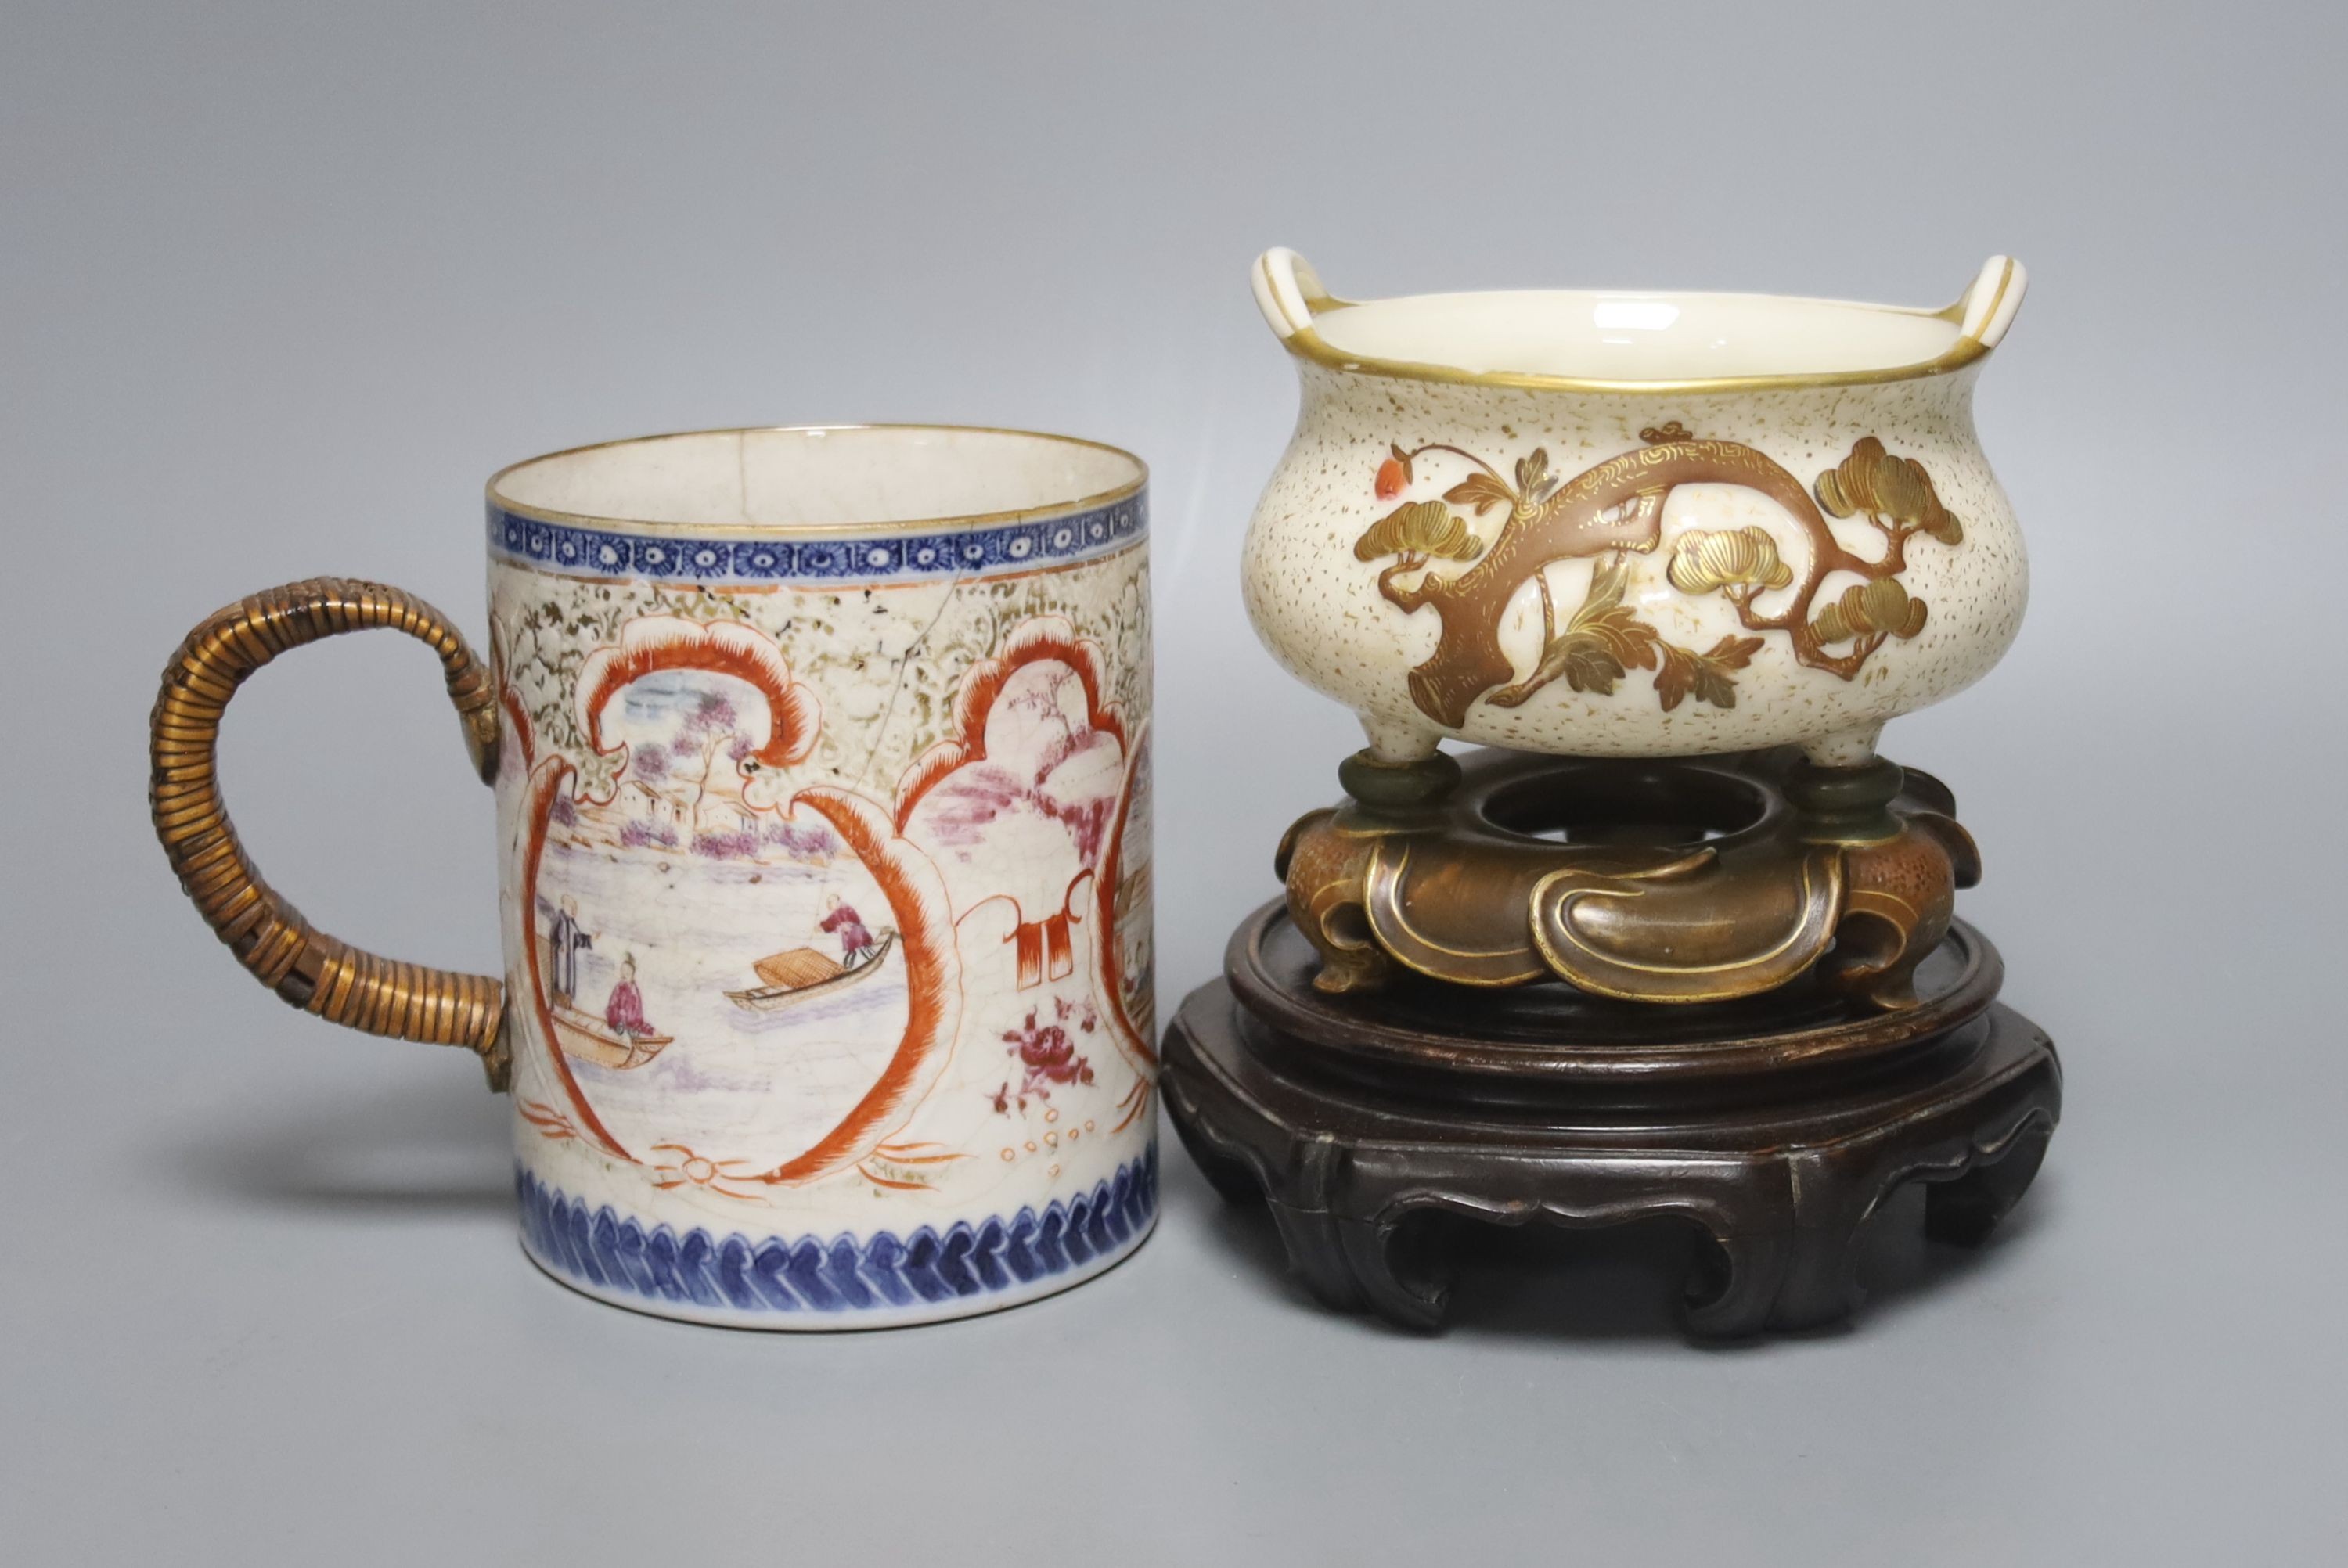 A Royal Worcester chinoiserie incense burner and integral stand, late 19th century, 11.5cmwide, wood stand and an 18th century Chinese export rose famille mug, with later metal handle